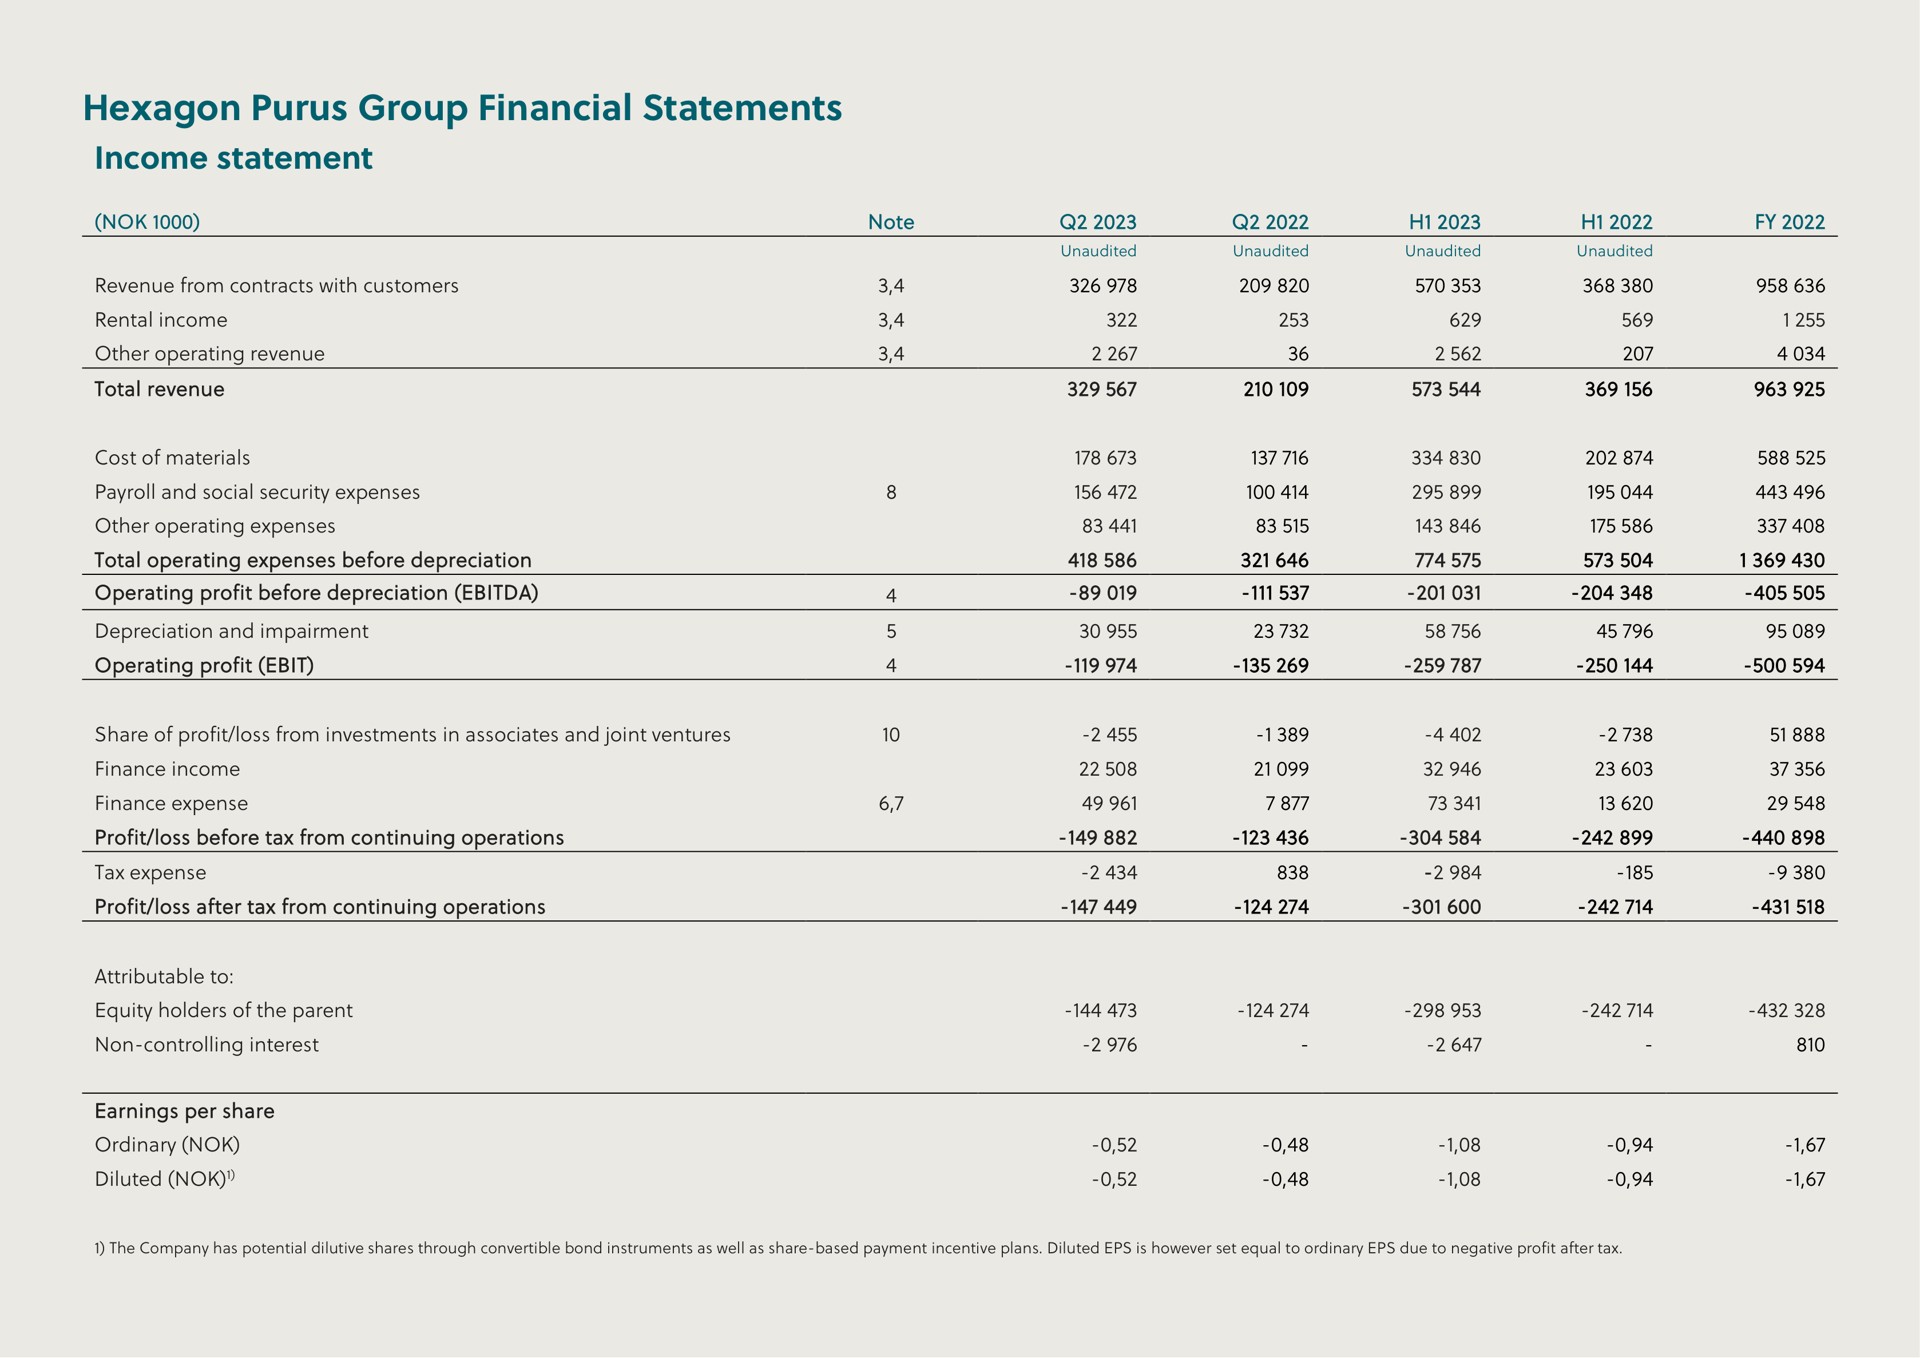 hexagon group financial statements income statement total operating expenses before depreciation operating profit before depreciation operating profit share of profit loss from investments in associates and joint ventures profit loss before tax from continuing operations profit loss after tax from continuing operations note | Hexagon Purus